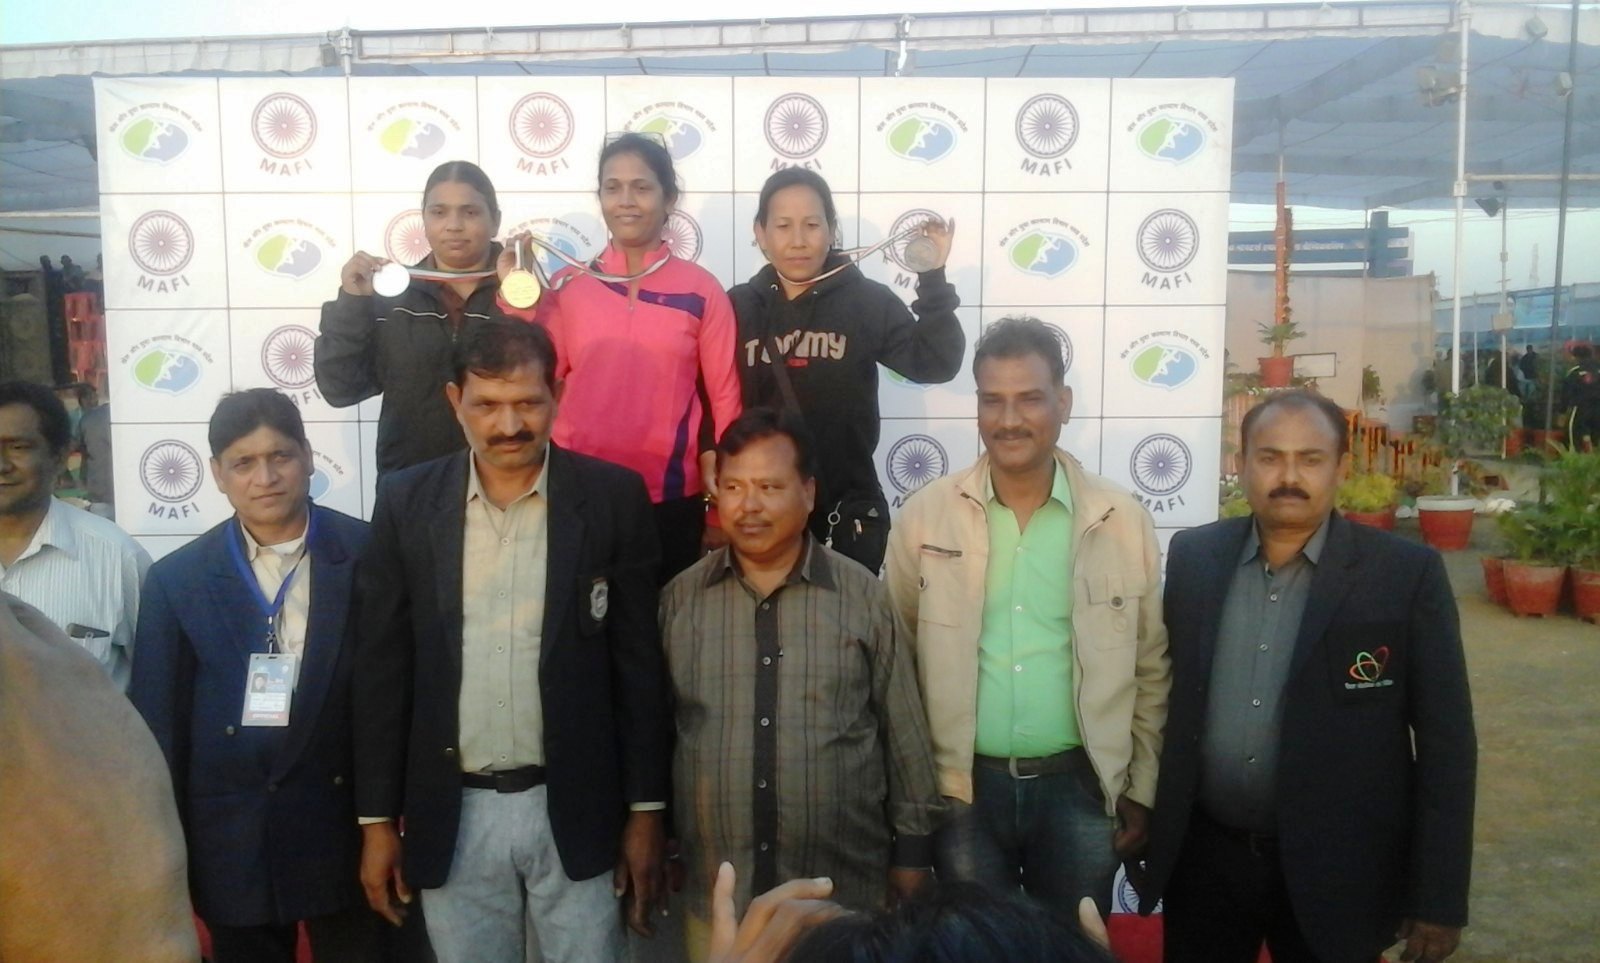 As one of Rajasthan’s foremost female athletes she has worked hard to build a successful sporting career.